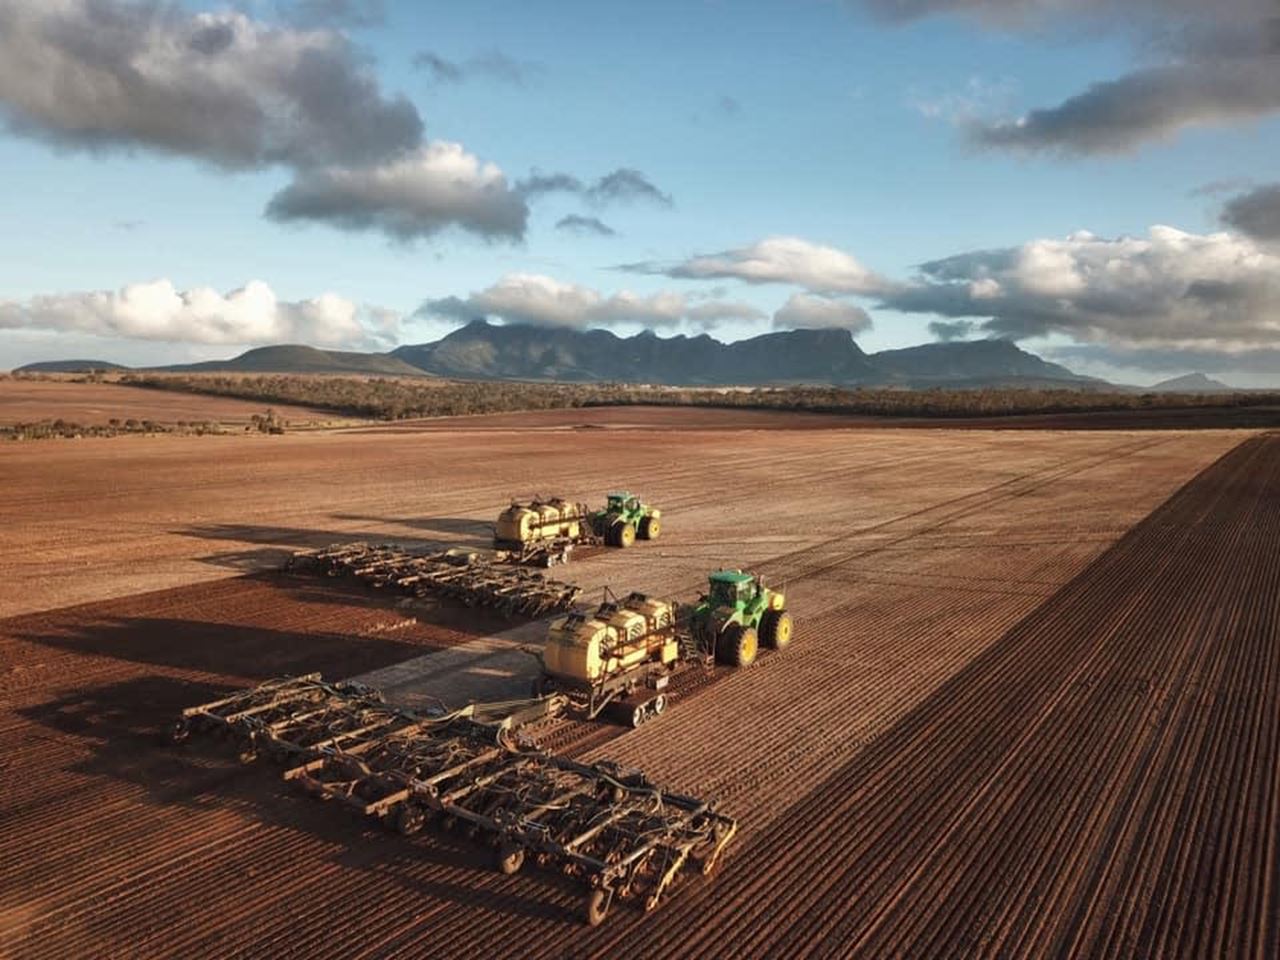 Two green tractors pulling two seeders work side by side in a reddish brown paddock